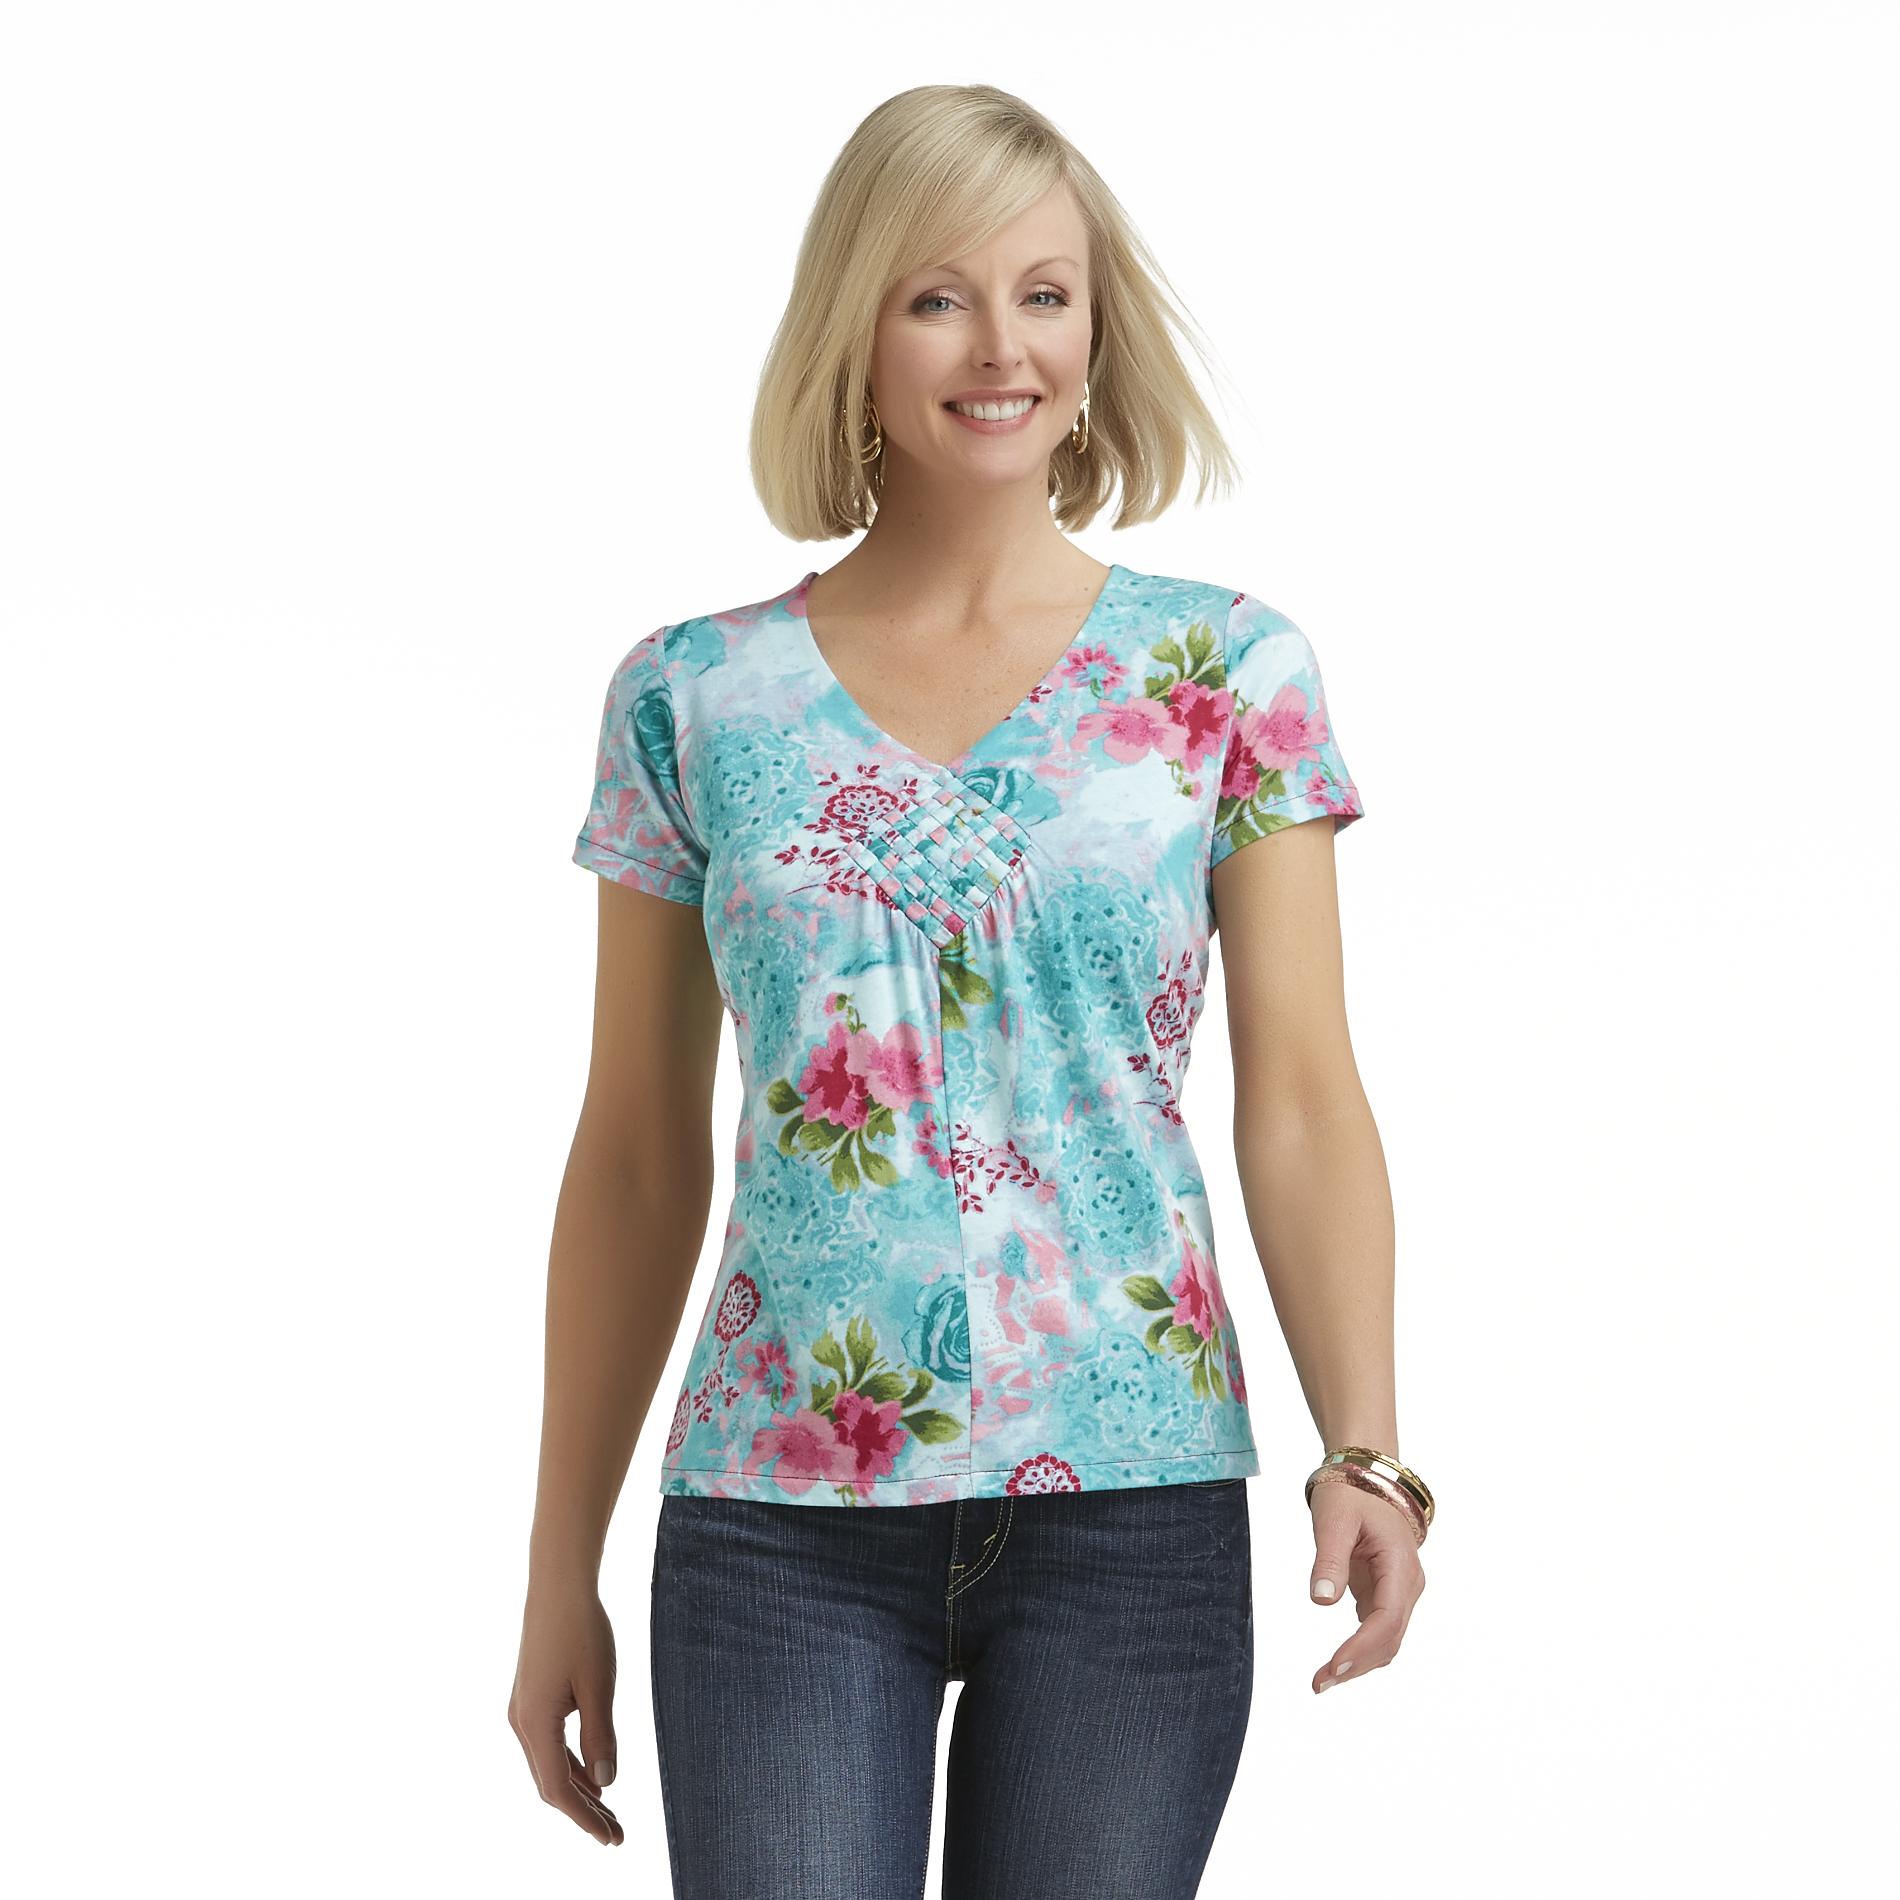 Basic Editions Women's Short-Sleeve Top - Floral